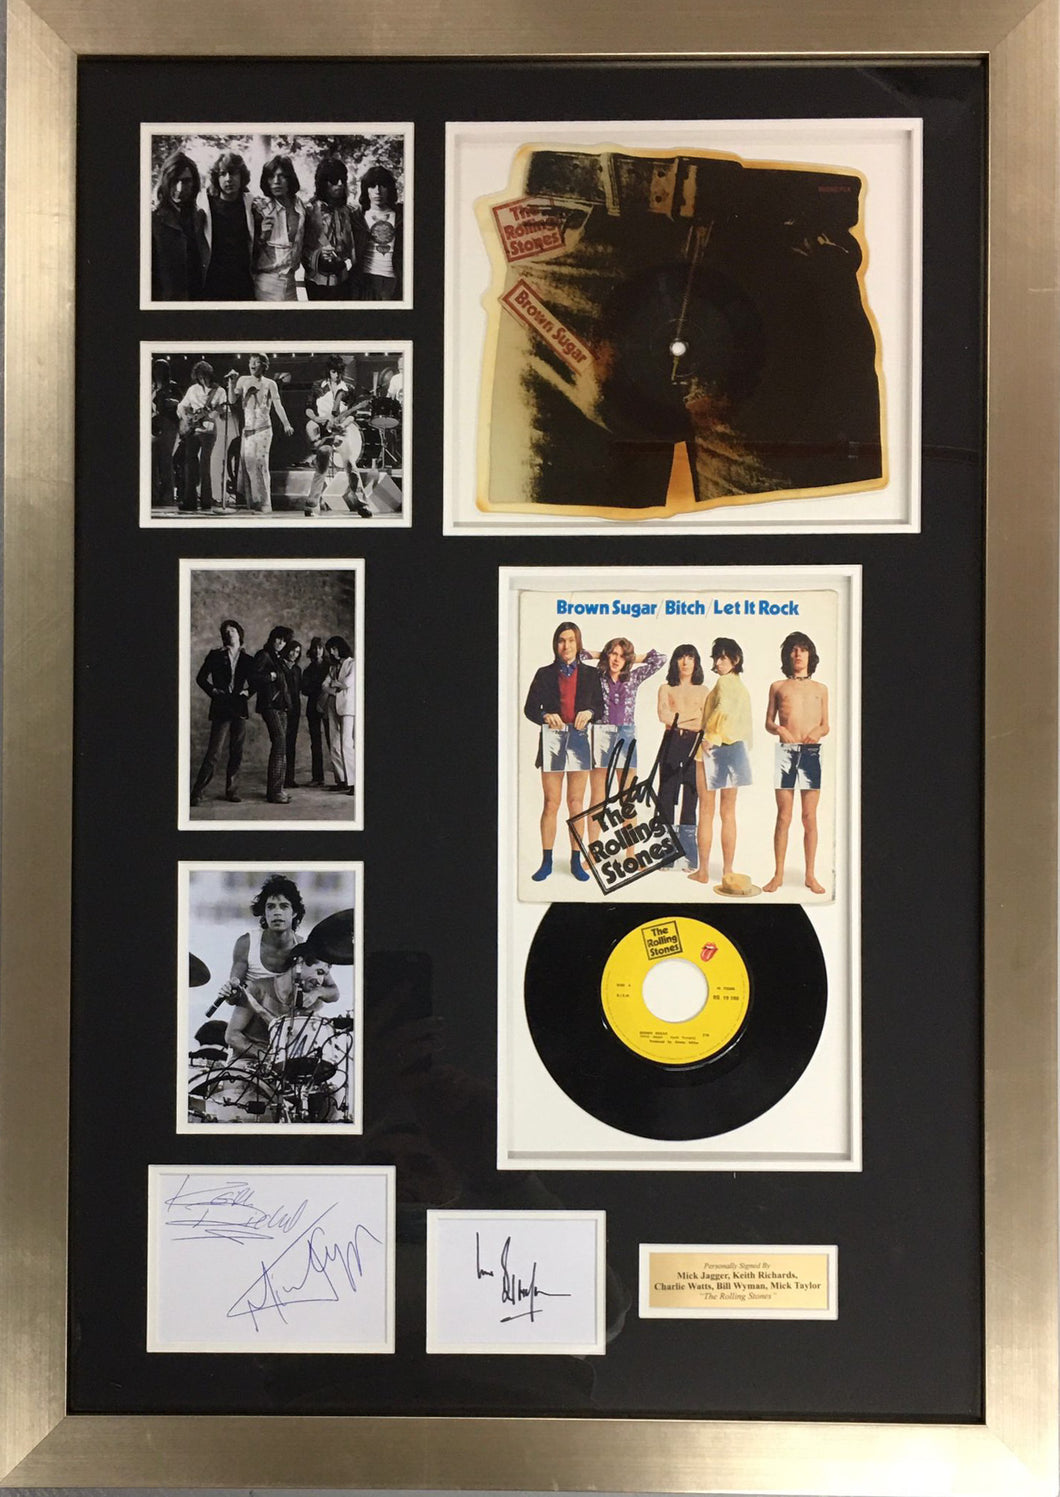 THE ROLLING STONES - MICK JAGGER, KEITH RICHARDS, CHARLIE WATTS, BILL WYMAN & MICK TAYLOR Signed Display